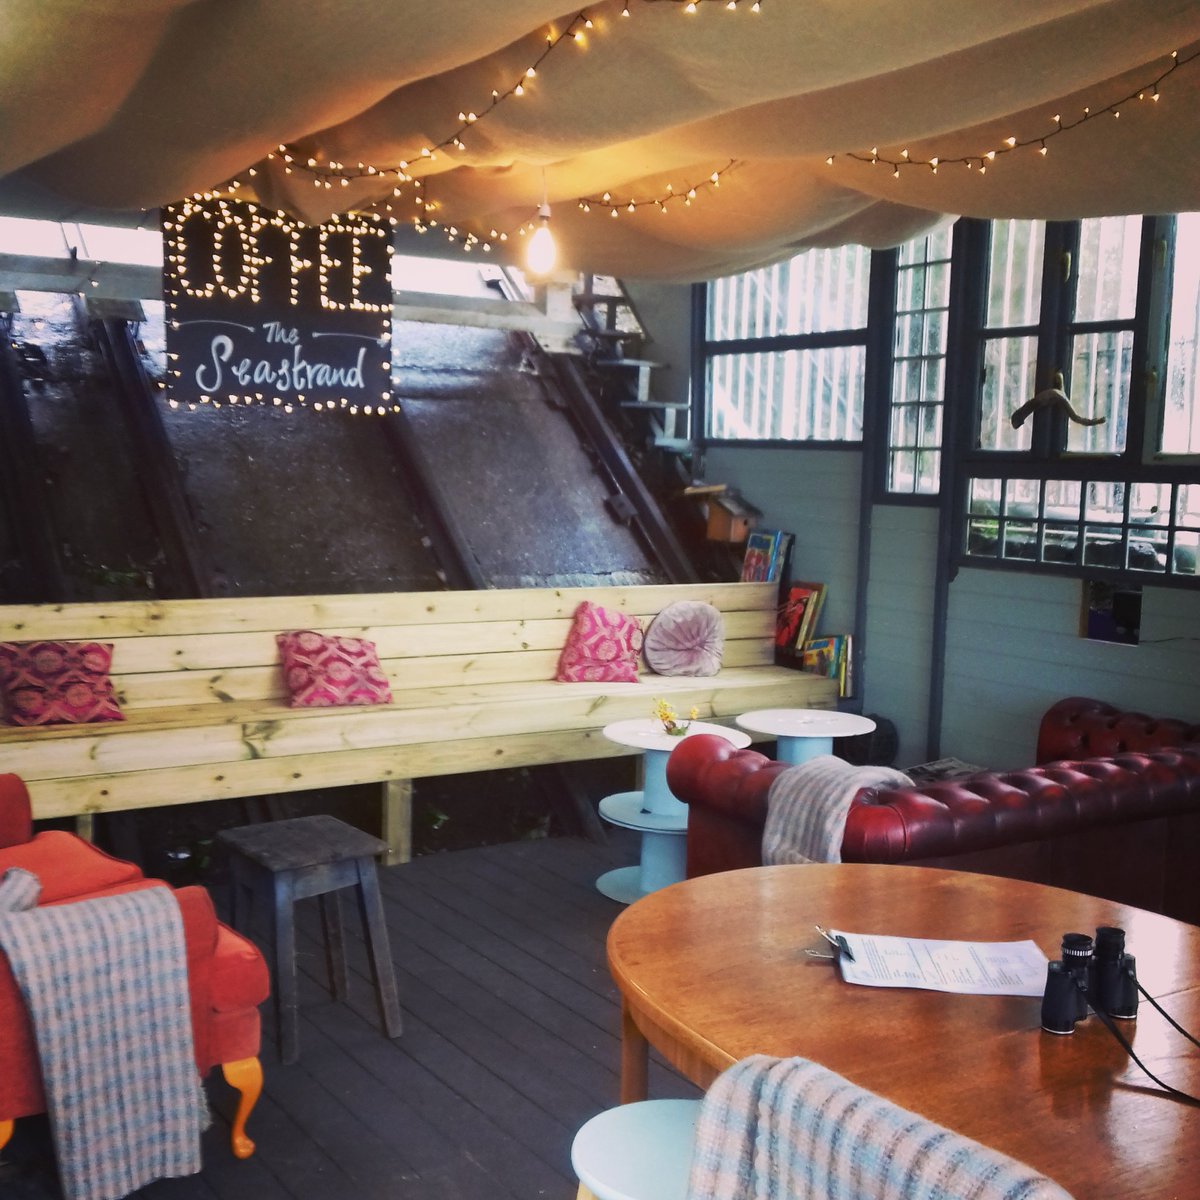 Ta-da!! We have a new #bench built into the rails, #hessian ceiling, comfy #sofas, new tables and a new sparkly #sign to go with new 'walls' and #windowsmadefromwindows It's super cosy folks! #scarborough #coffeekiosk #bigdreamssmallspaces #weusedtobeatramstation #coffee